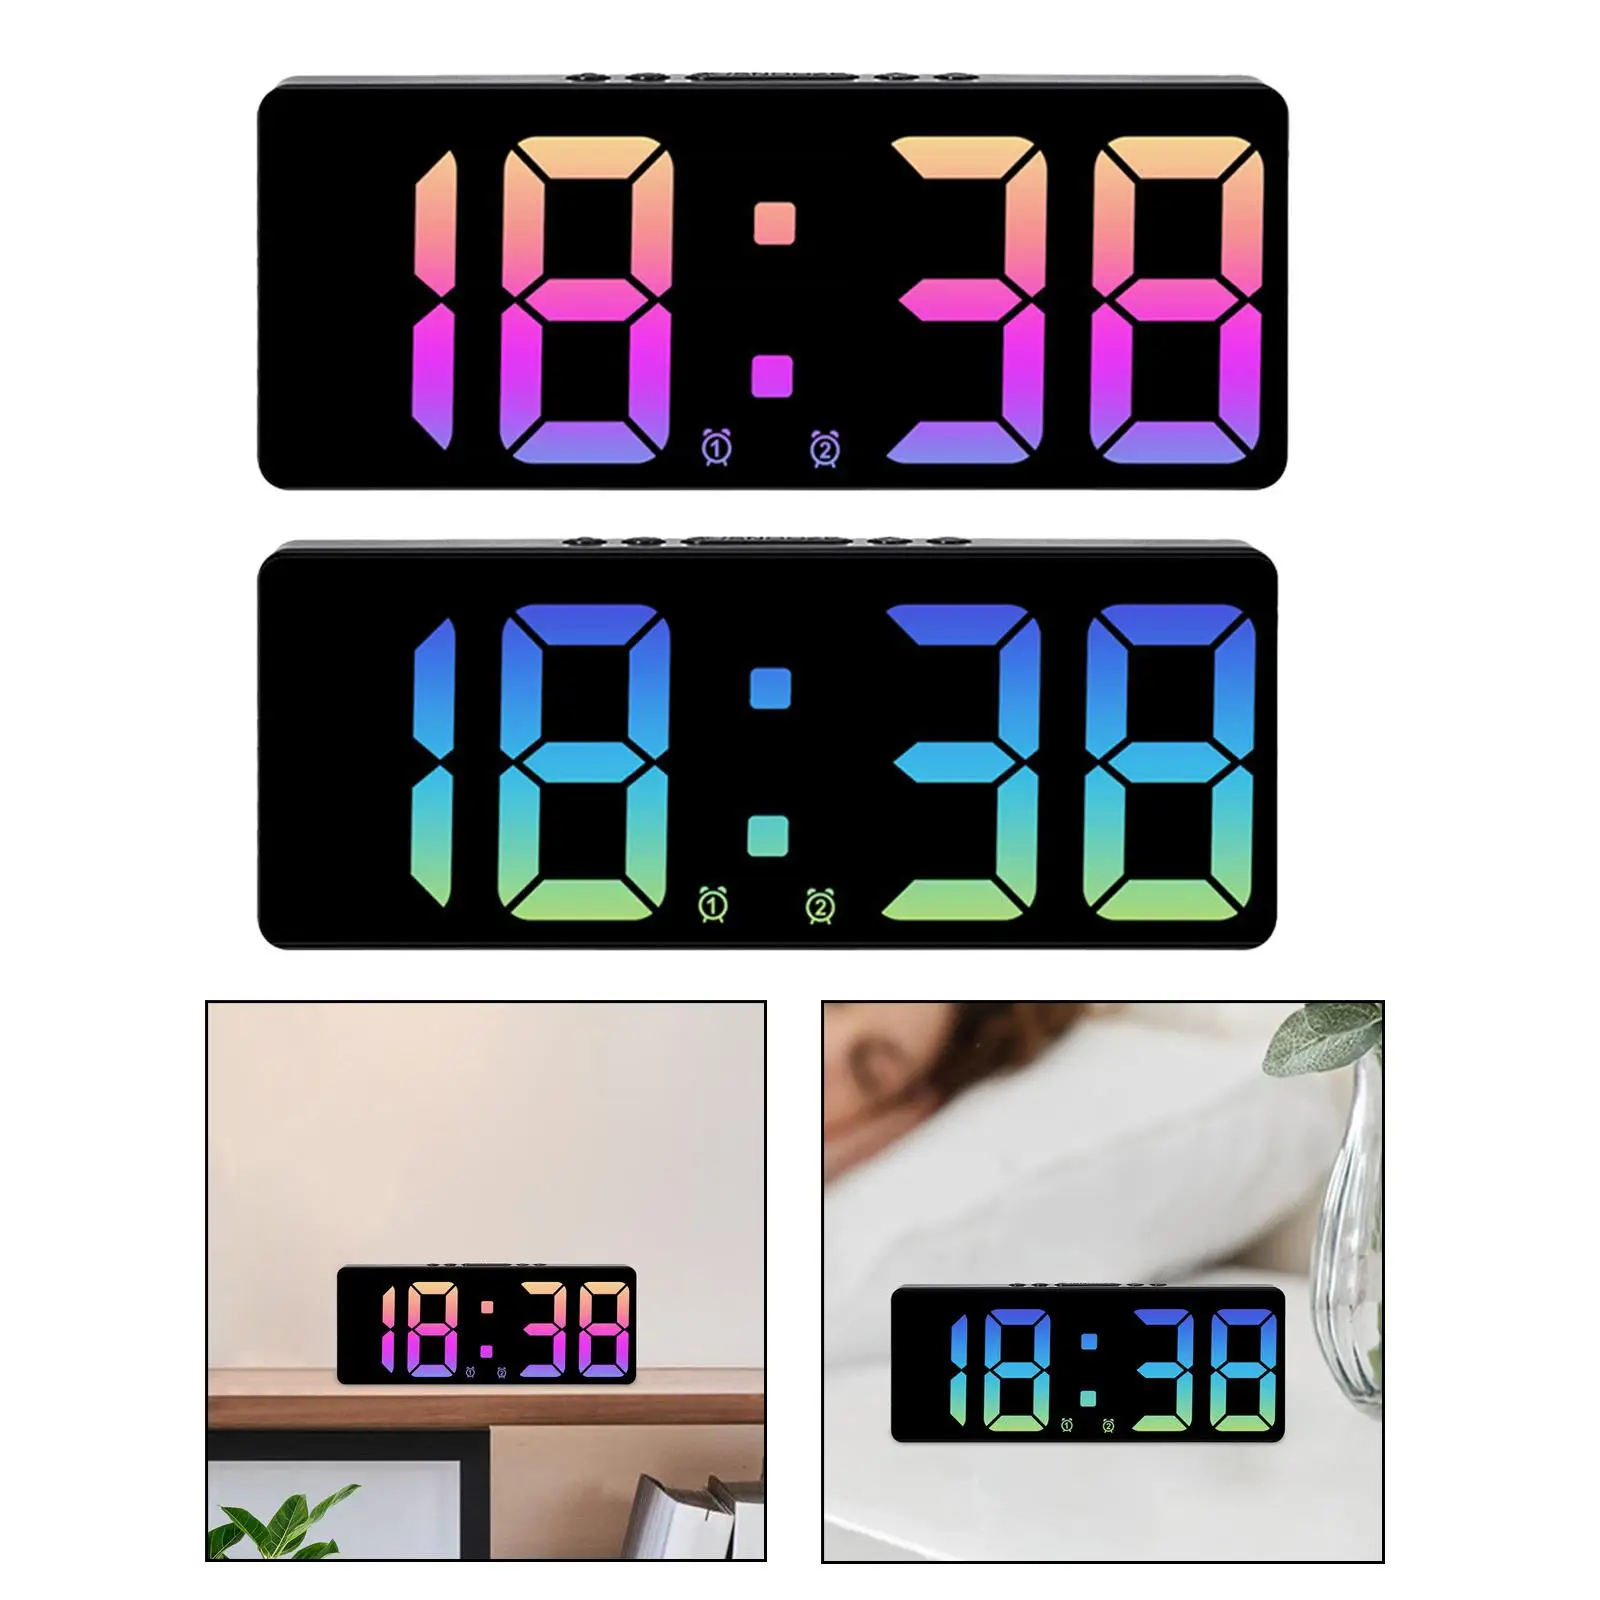 15.5cm Digital Alarm Clock Bedside Clock 6x0.9x2.4inch 12 Hour/24 Hour Portable Snooze Function for Bedroom Multipurpose Stylish